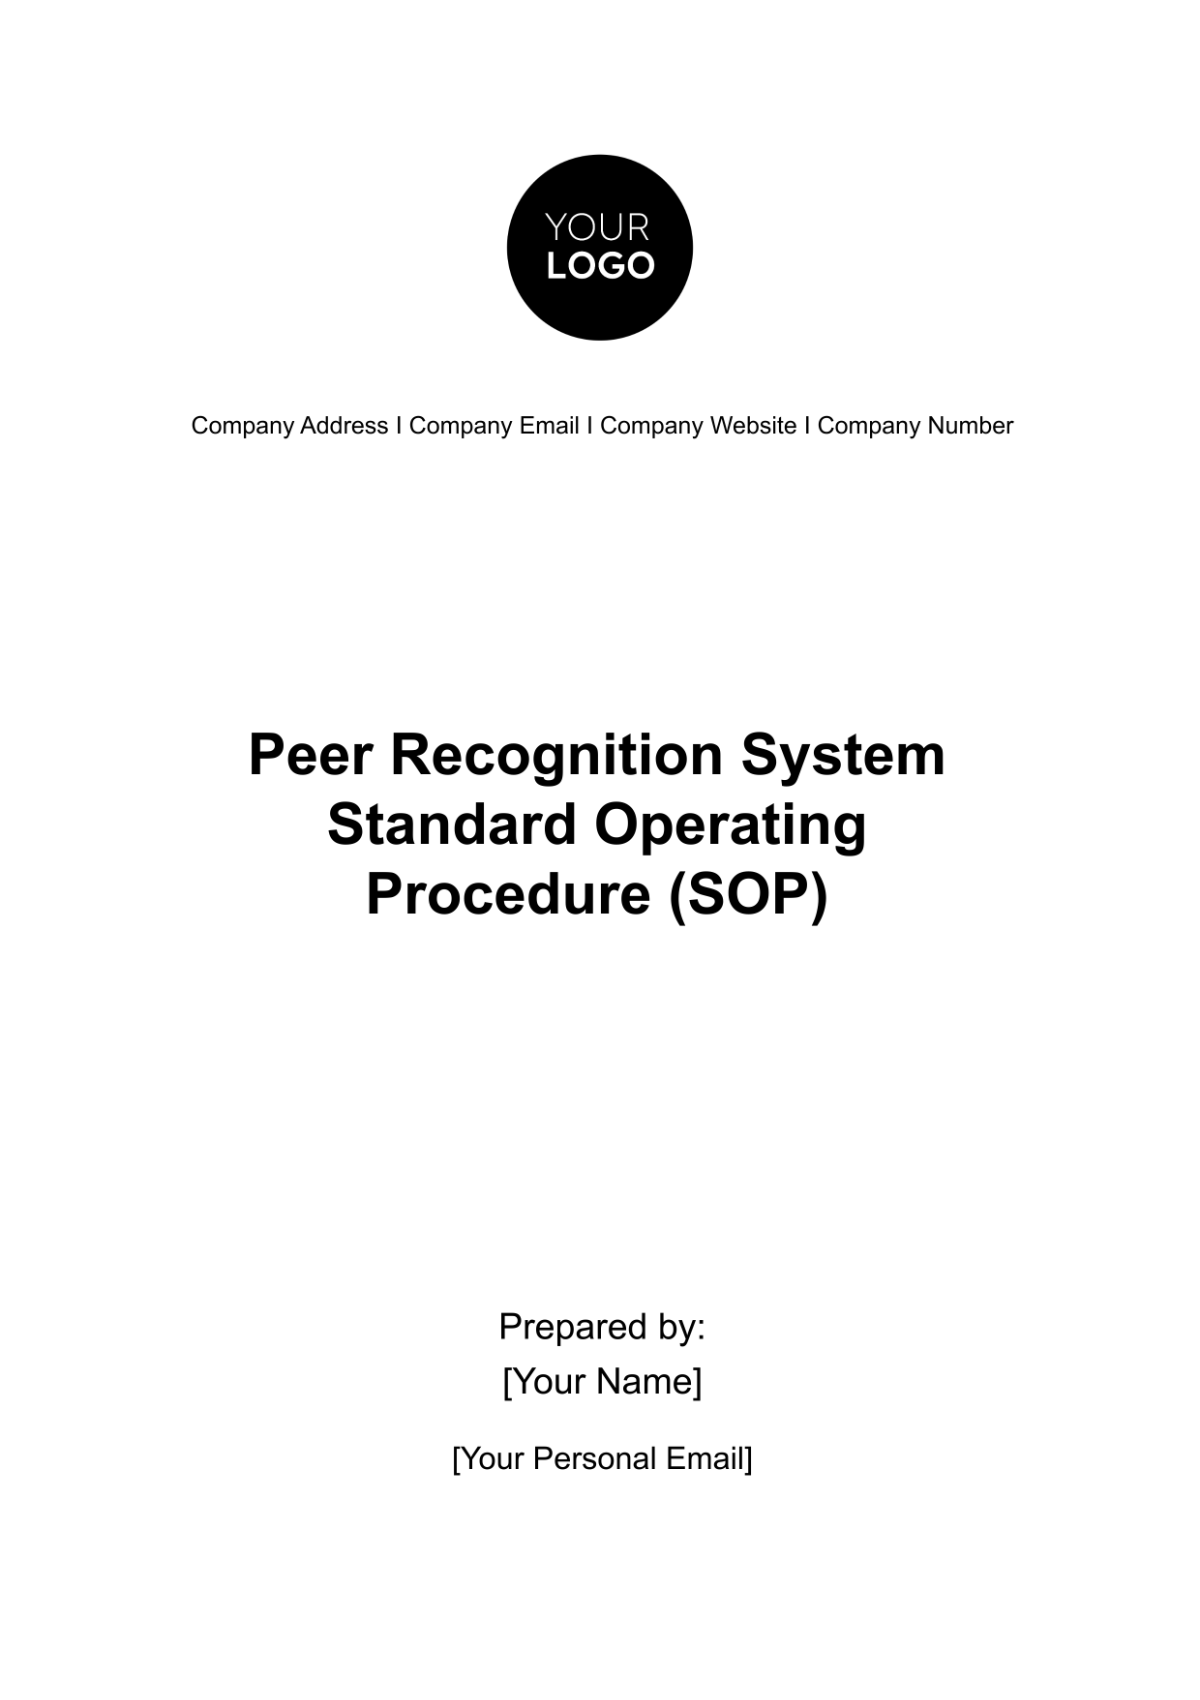 Free Peer Recognition System Standard Operating Procedure (SOP) HR Template